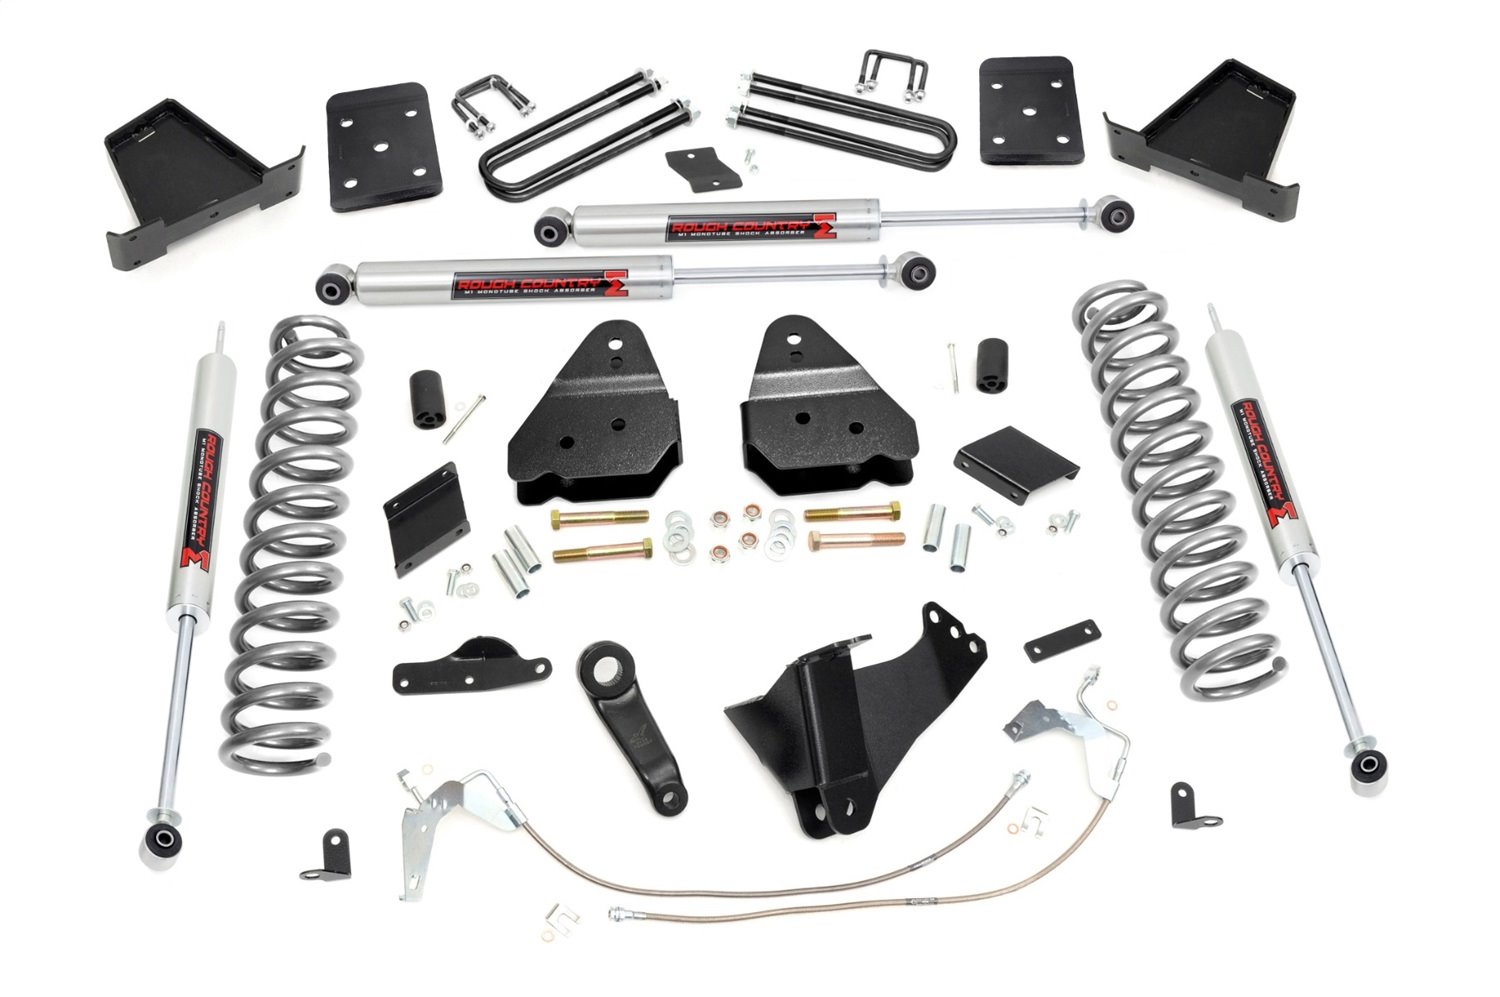 56440 6 in. Lift Kit, Diesel, OVLD, M1, Ford Super Duty 4WD (11-14)